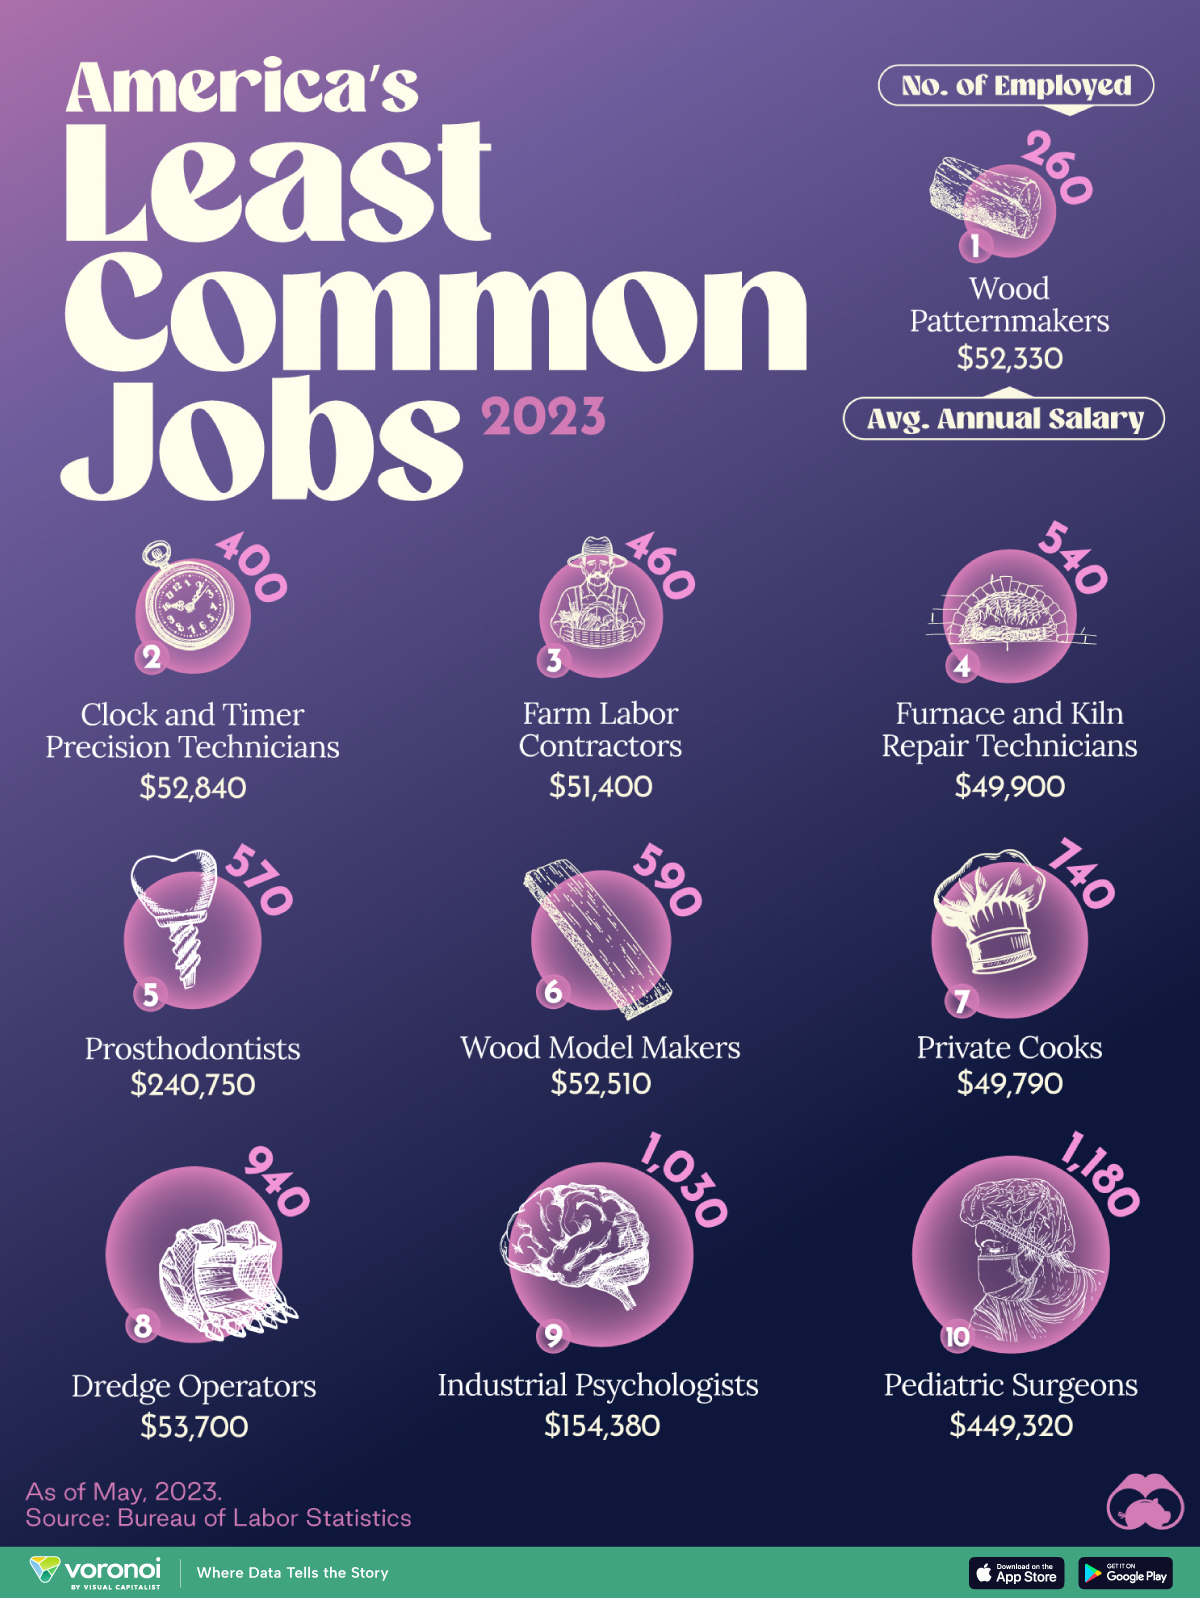 A chart ranking the least common American jobs by number of people employed by a business, as of May 2023.